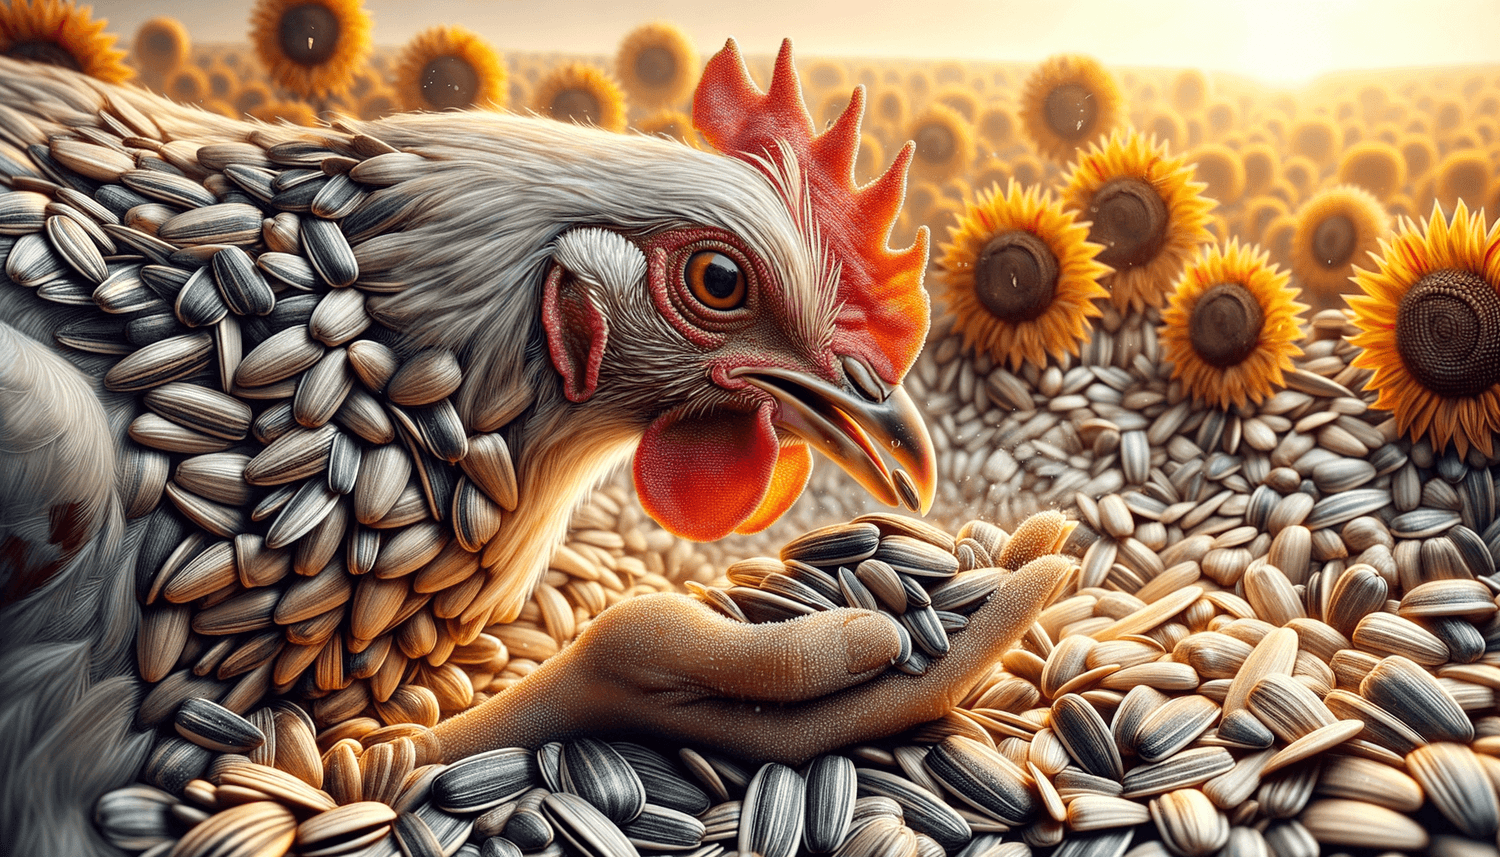 Can Chickens Eat Sunflower Seeds with Shells?